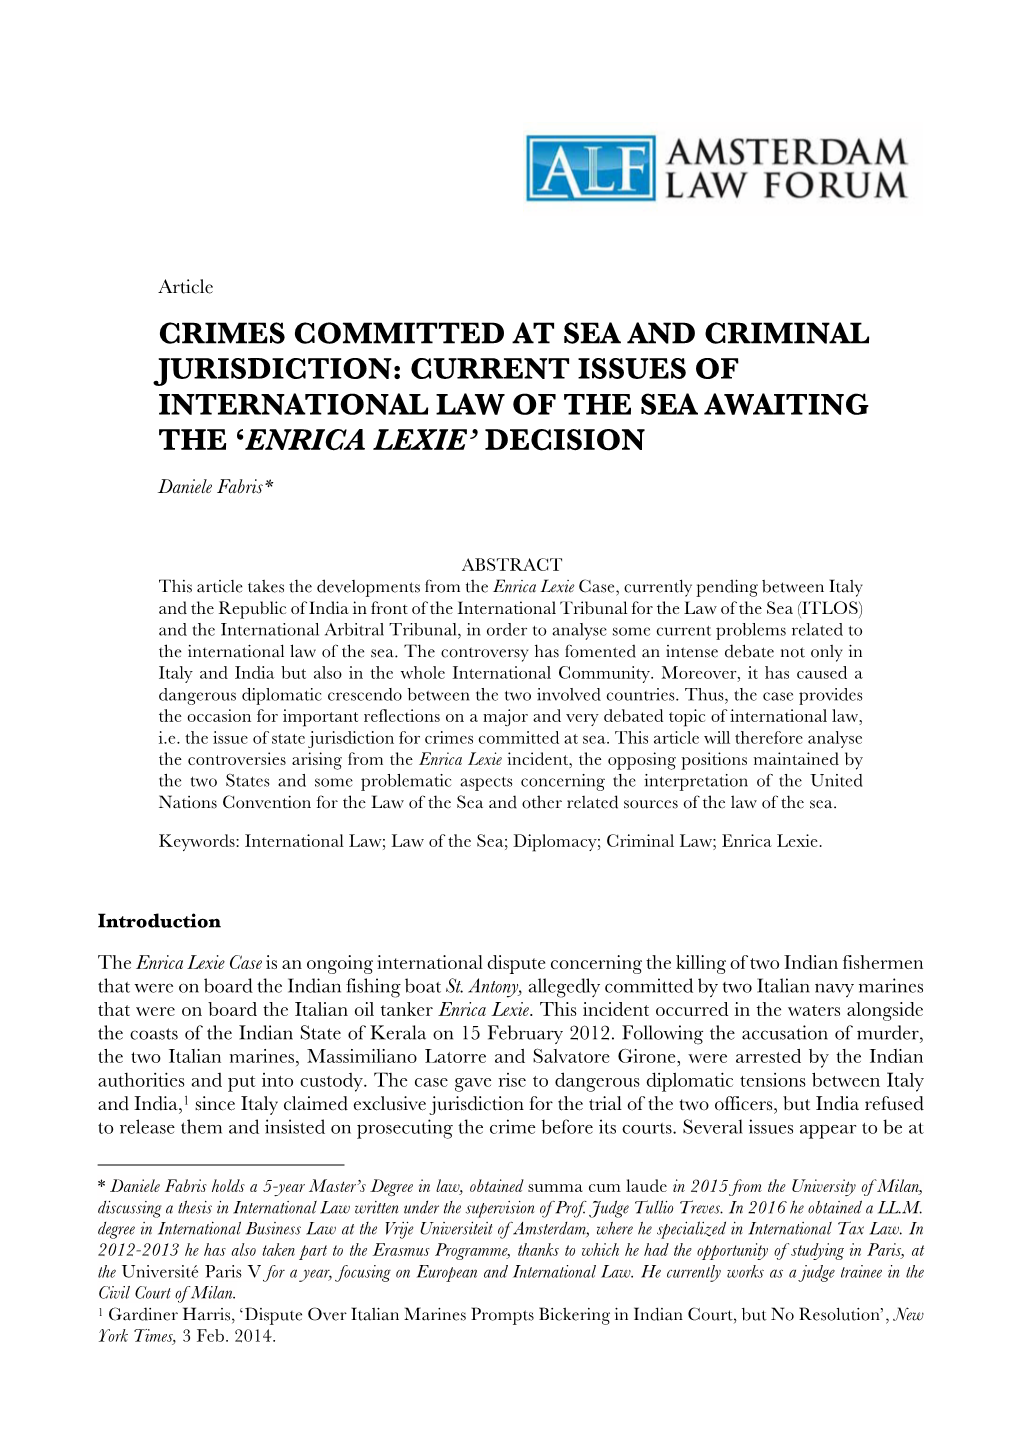 Crimes Committed at Sea and Criminal Jurisdiction: Current Issues of International Law of the Sea Awaiting the 'Enrica Lexie